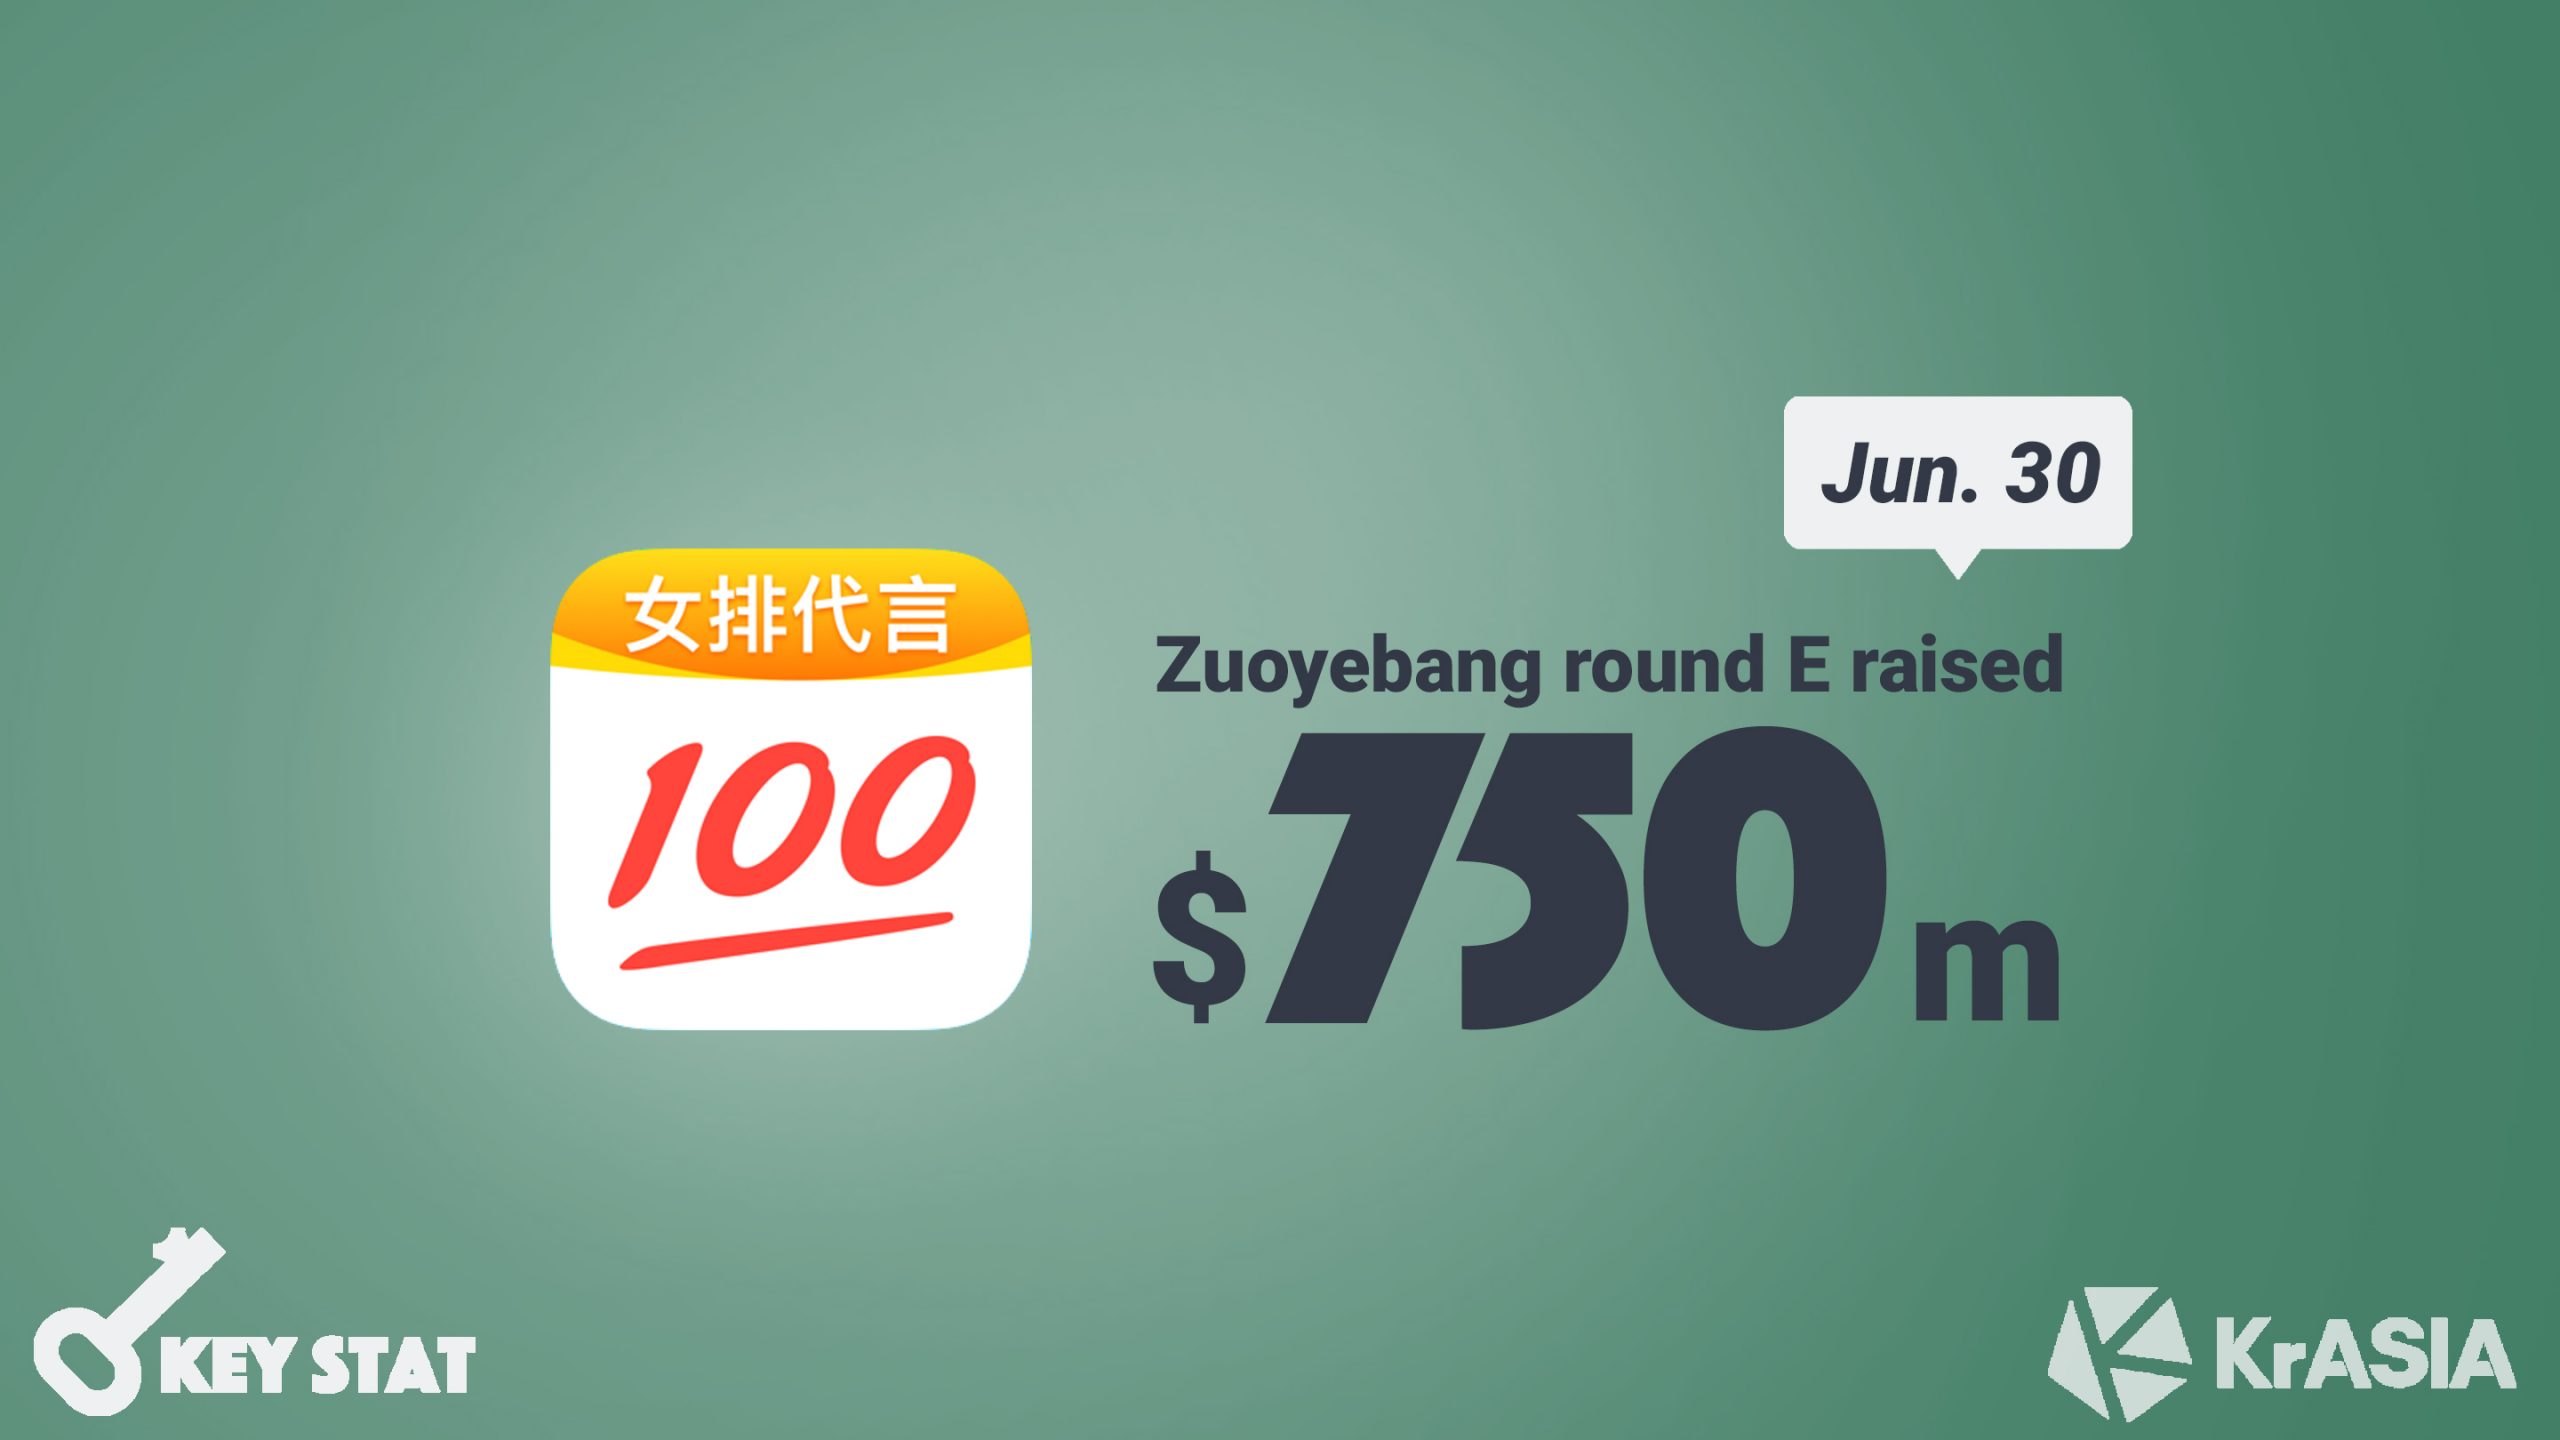 KEY STAT | China’s online K-12 tutor Zuoyebang collects USD 750 million in Series E round